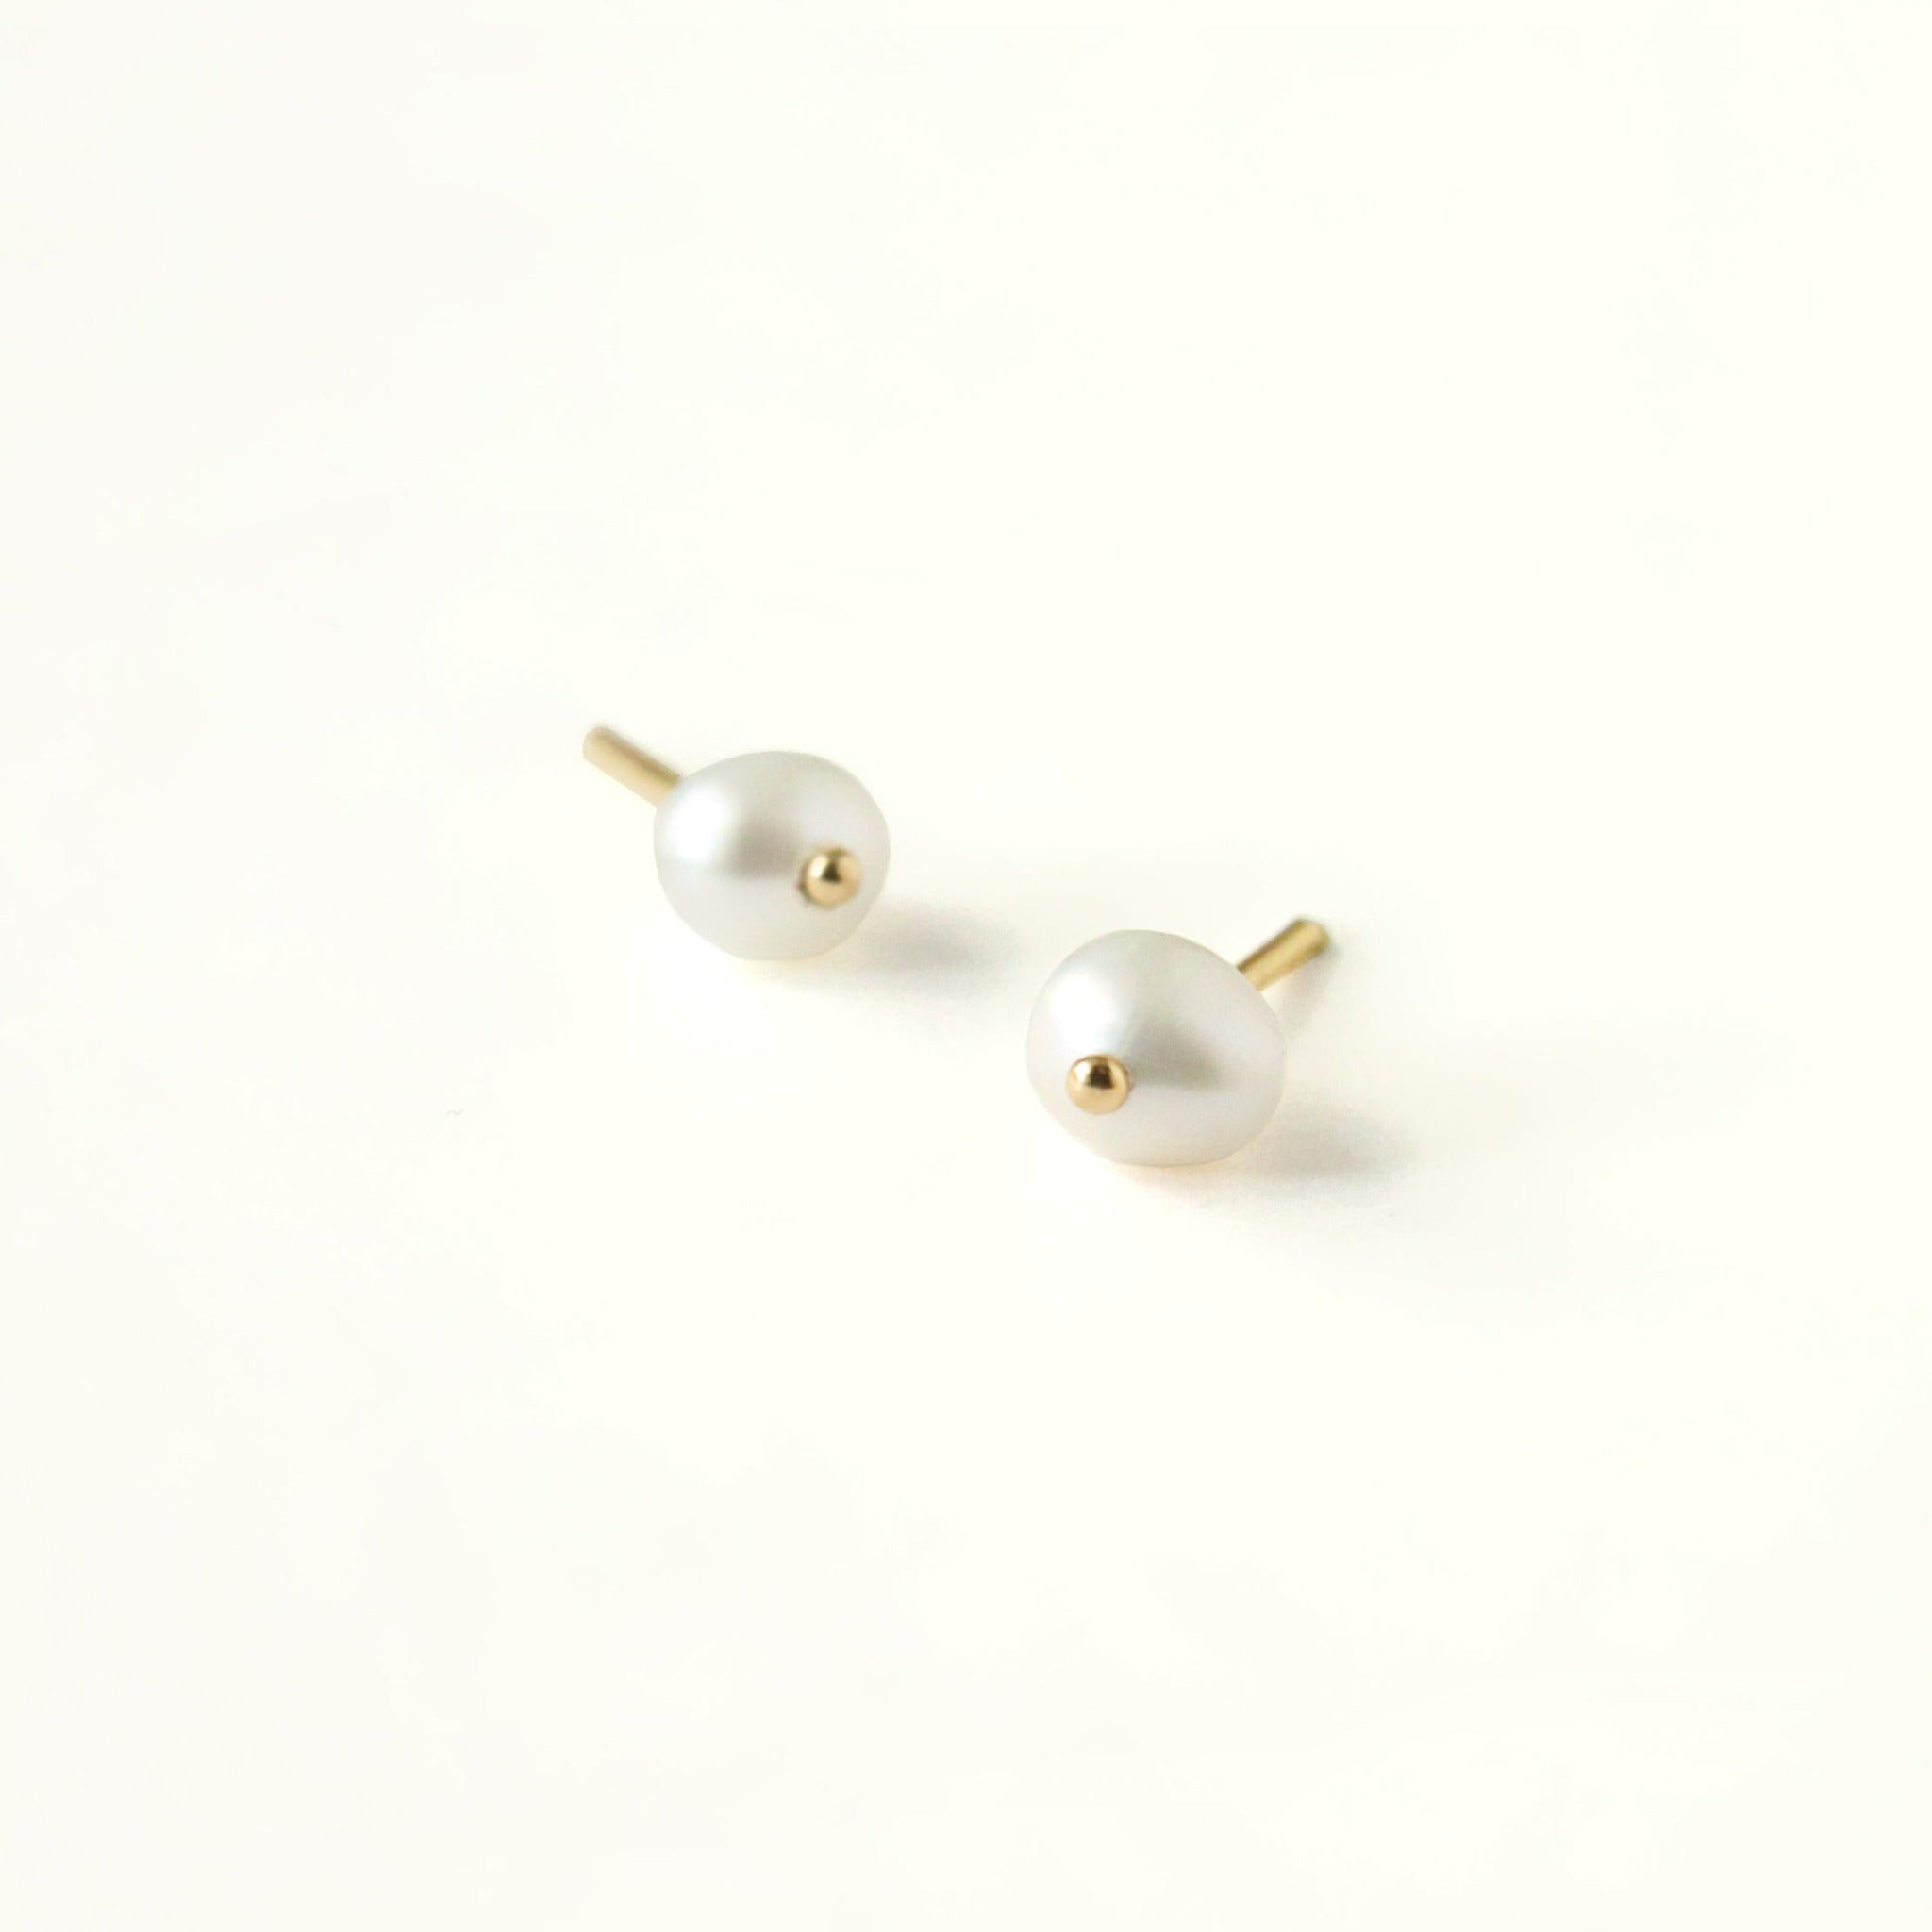 Sophisticated gold pearl stud earrings with a tiny gold ball detail. Unique design handcrafted with recycled 14k yellow gold and natural white round pearl. A timeless earring with a minimal and modern touch. 